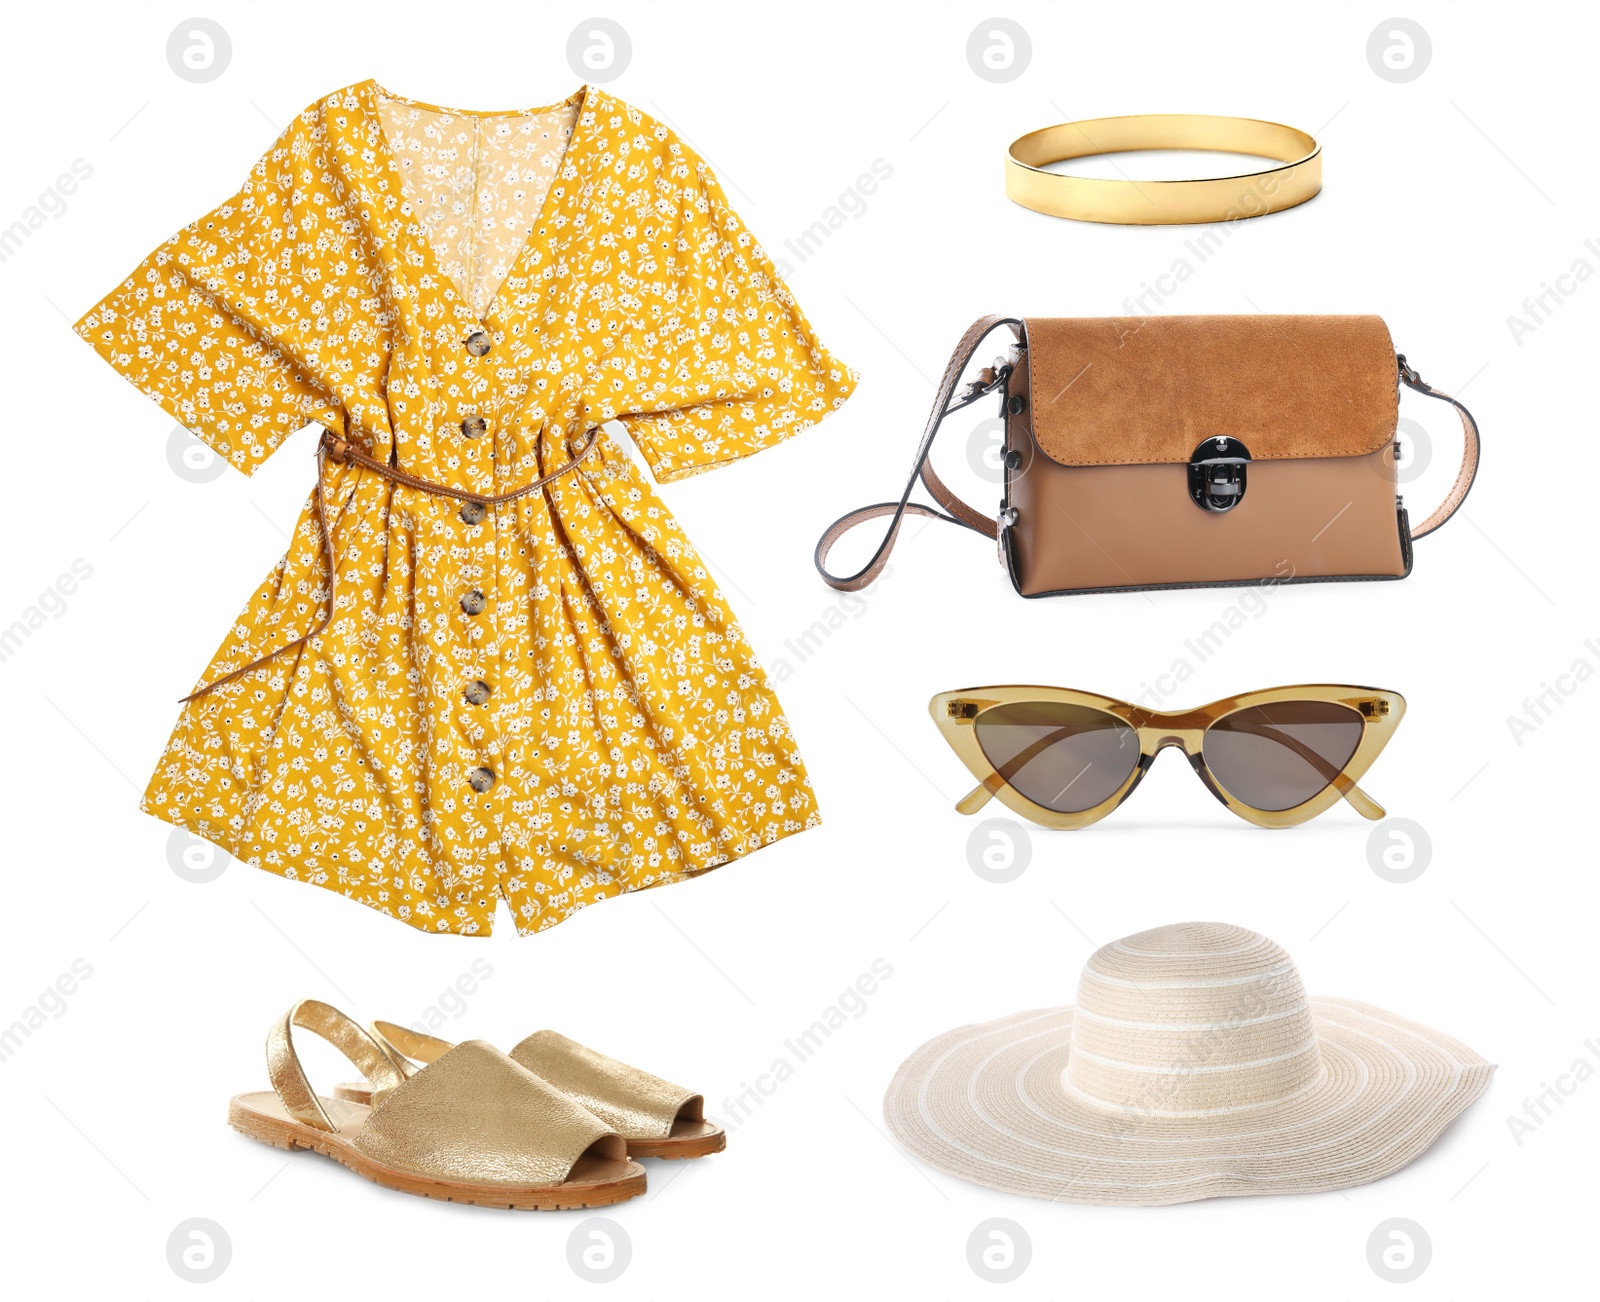 Image of Stylish look. Collage with dress, shoes and accessories for woman on white background